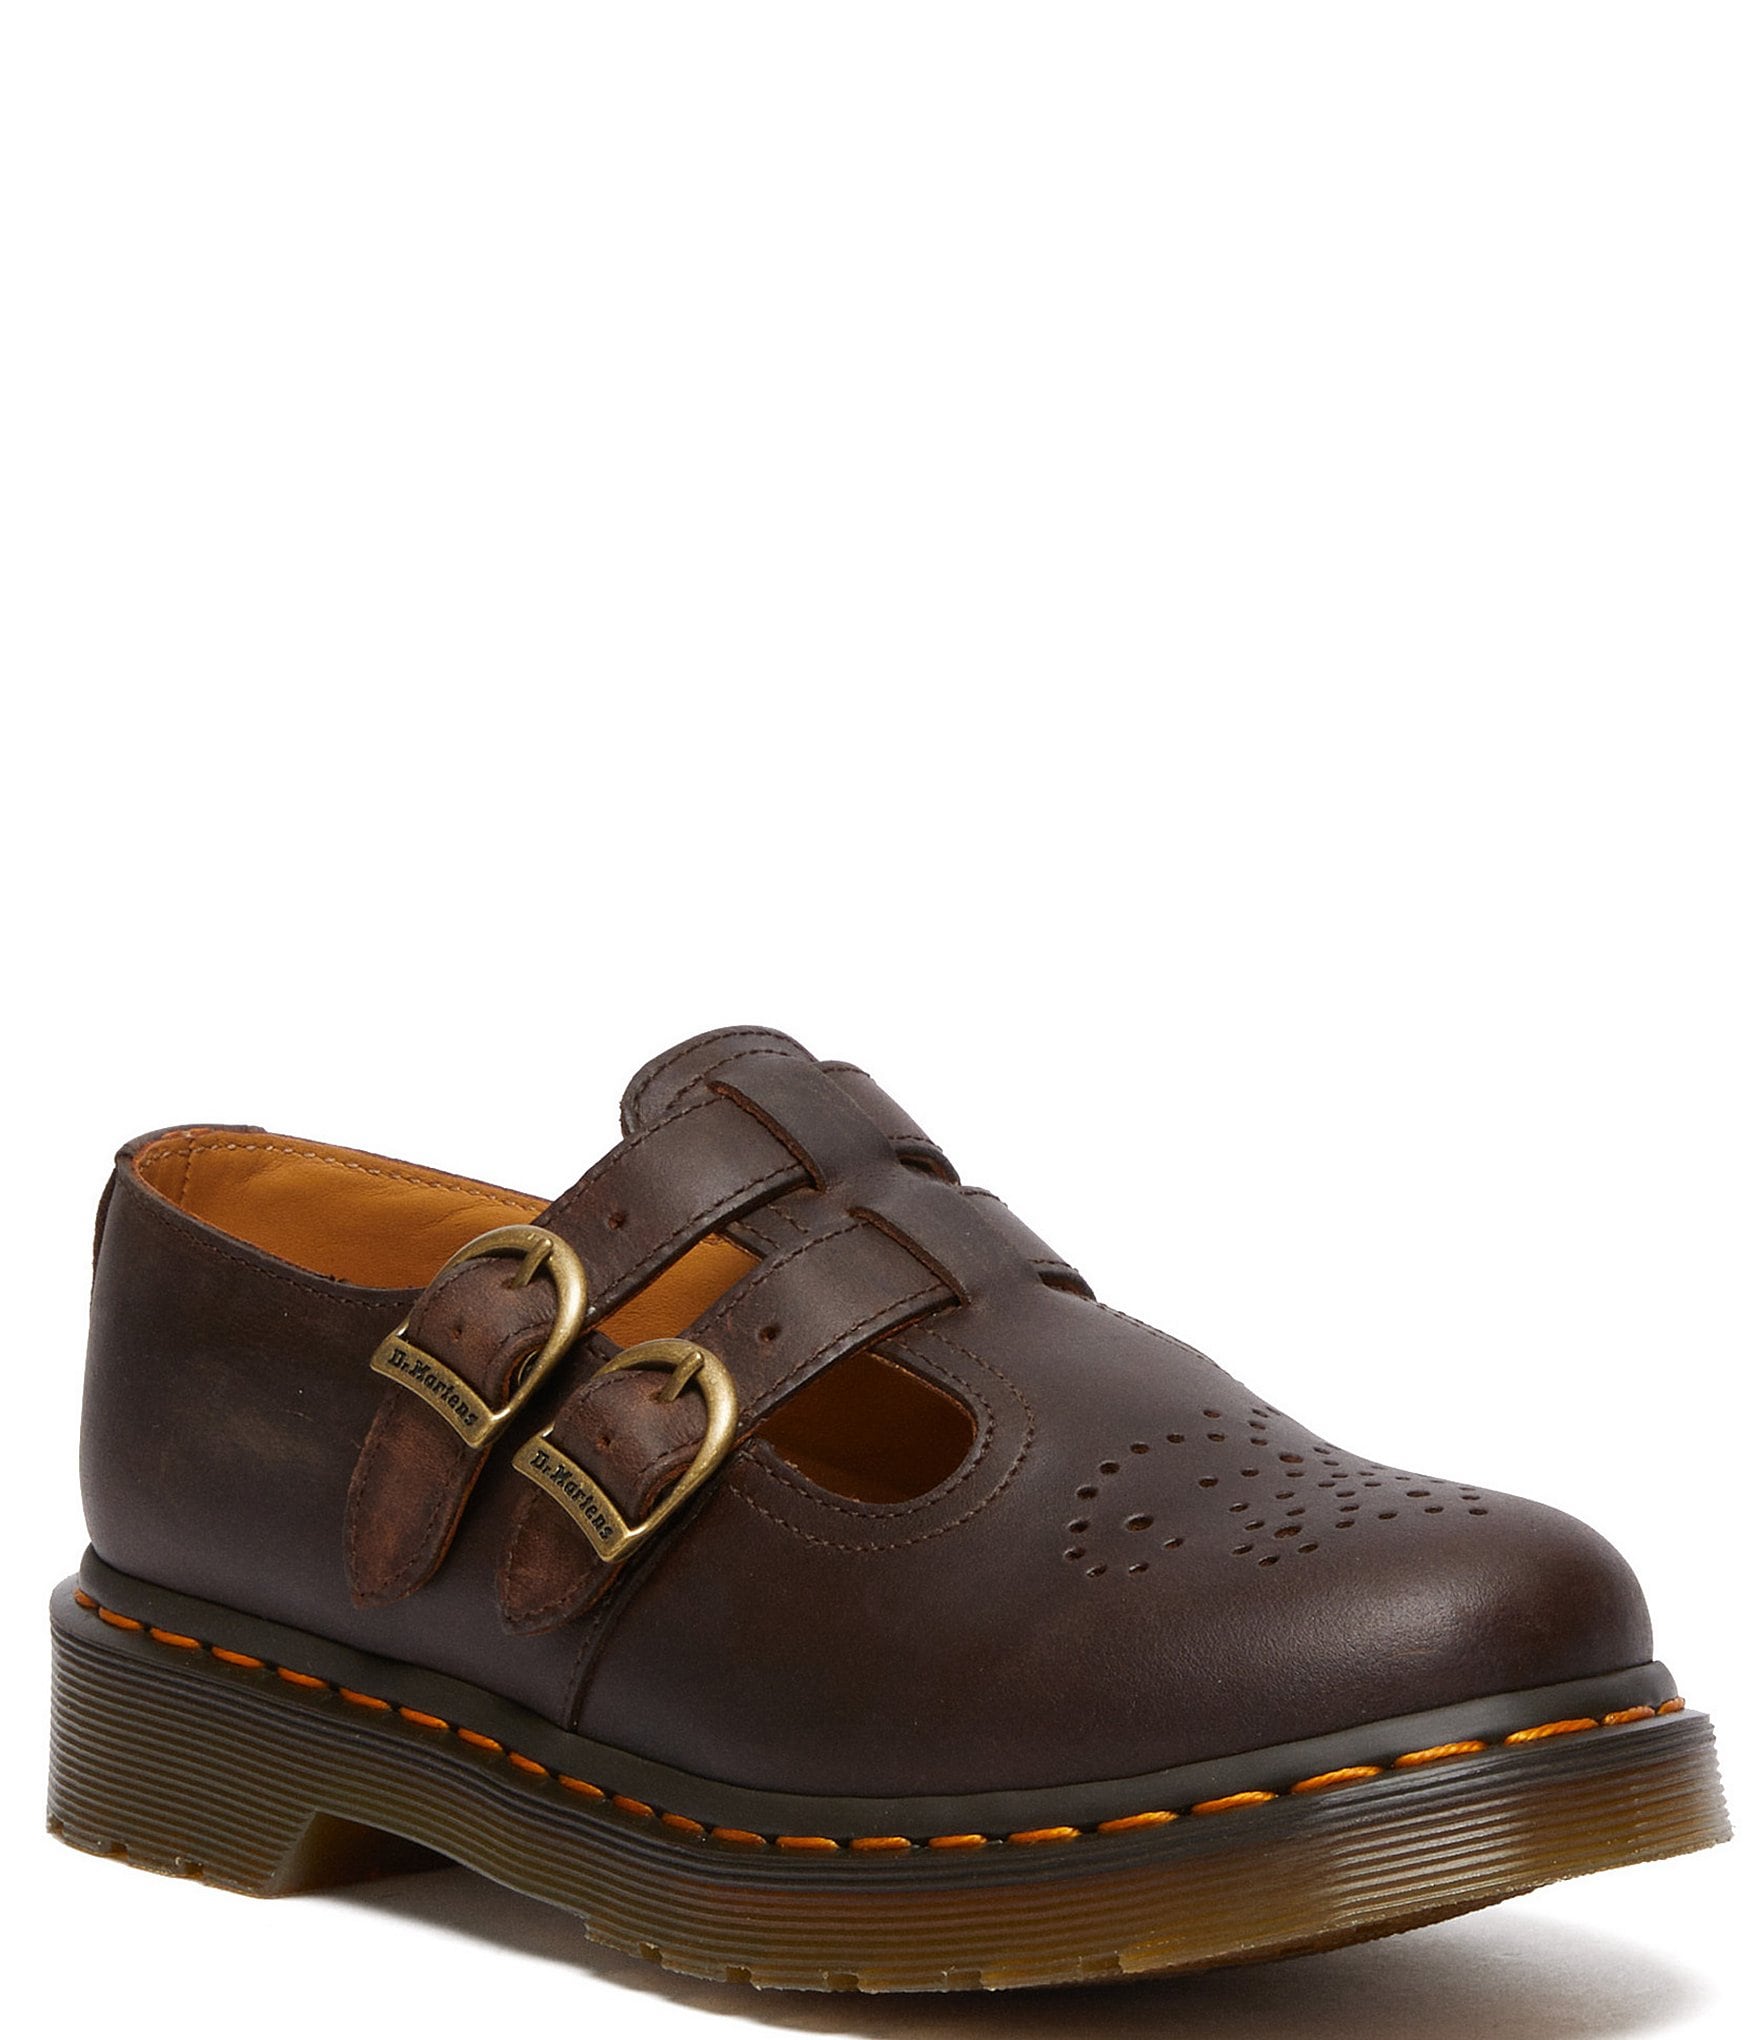 Dr. Martens Women's 8065 Mary Jane Crazy Horse Leather Shoes | Dillard's